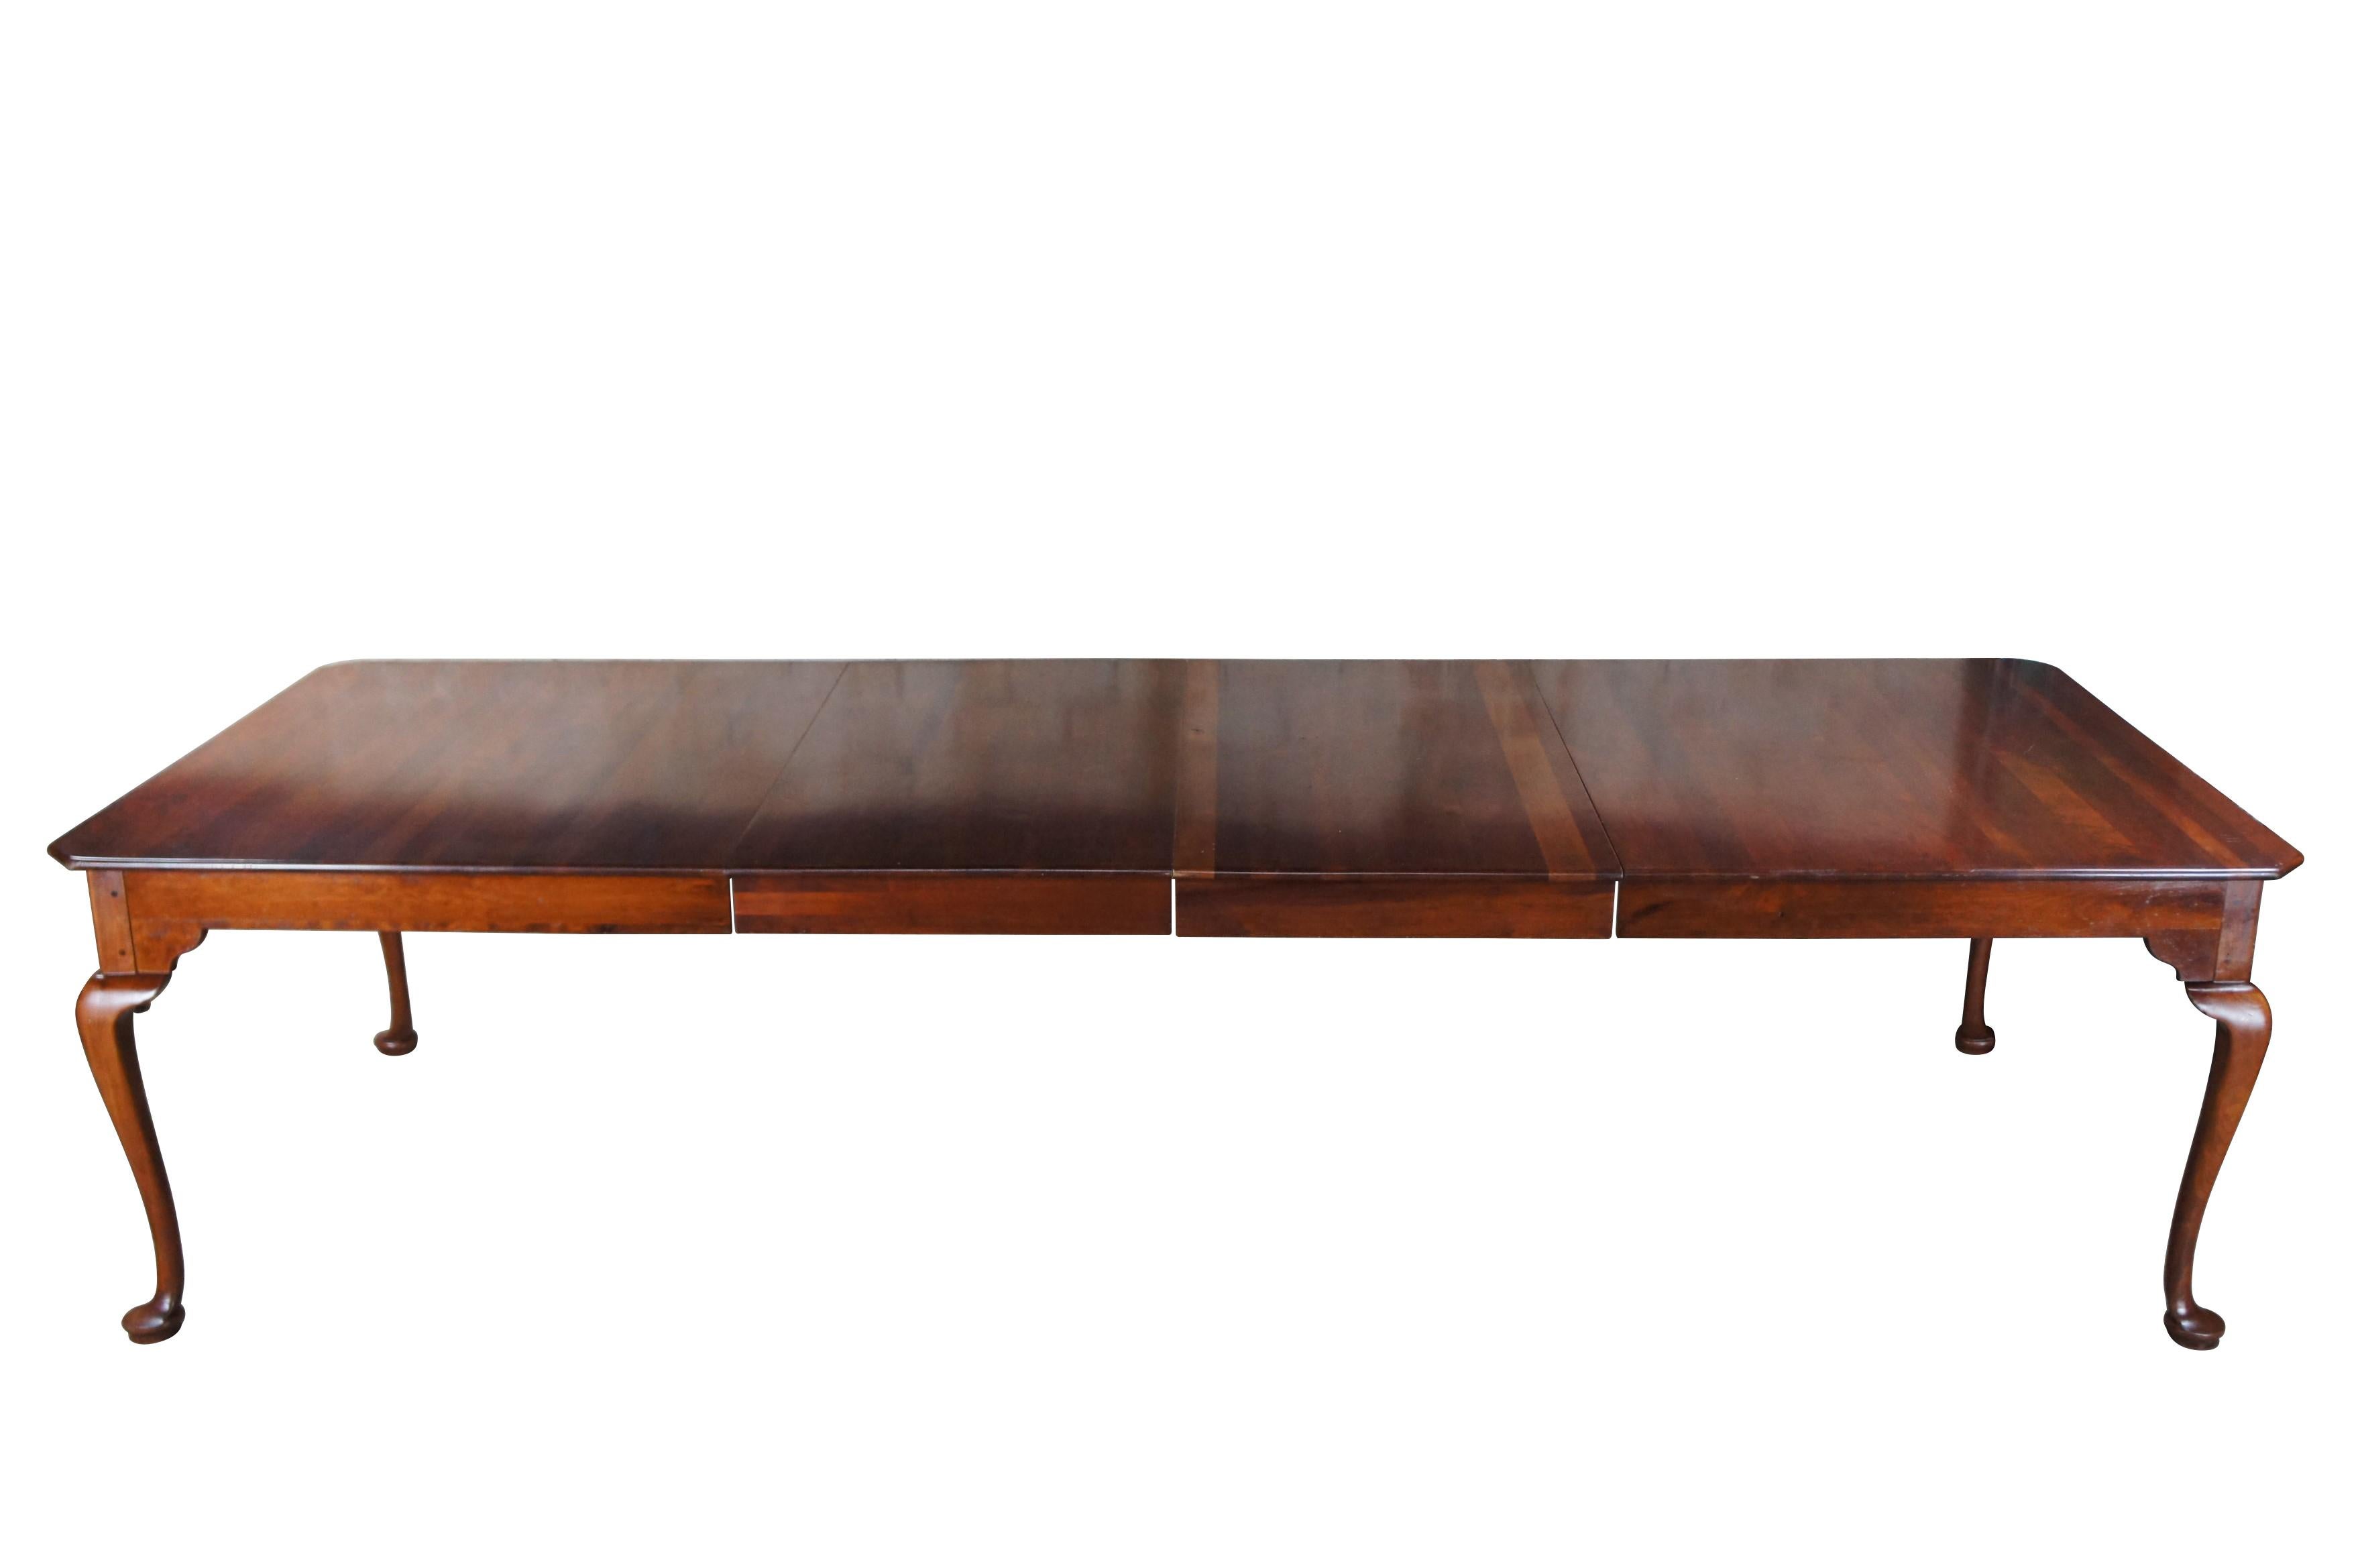 Vintage Lexington Furniture Bob Timberlake dining table. Made of solid cherry featuring Queen Anne styling with rectangular form 2 drawers and custom glass top. 833-879.

Dimensions:
45